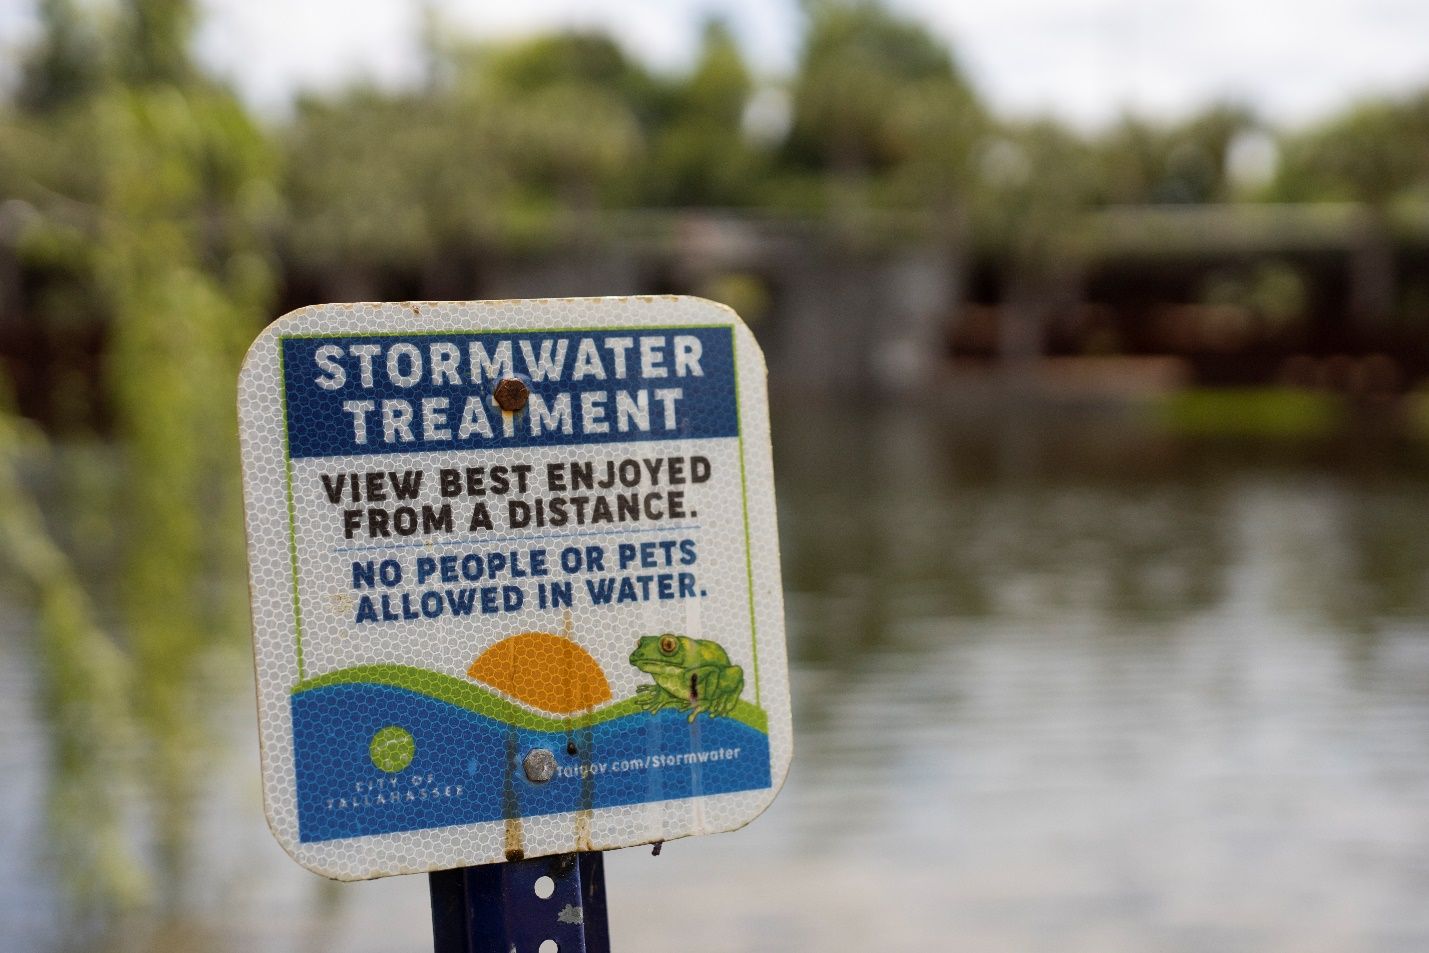 Stormwater ponds and other stormwater treatment areas collect excess rainfall from the land. This stormwater is often polluted with various substances. Actions can be taken to reduce pollutants in stormwater runoff and thus help keep our ponds and other water bodies clean.  